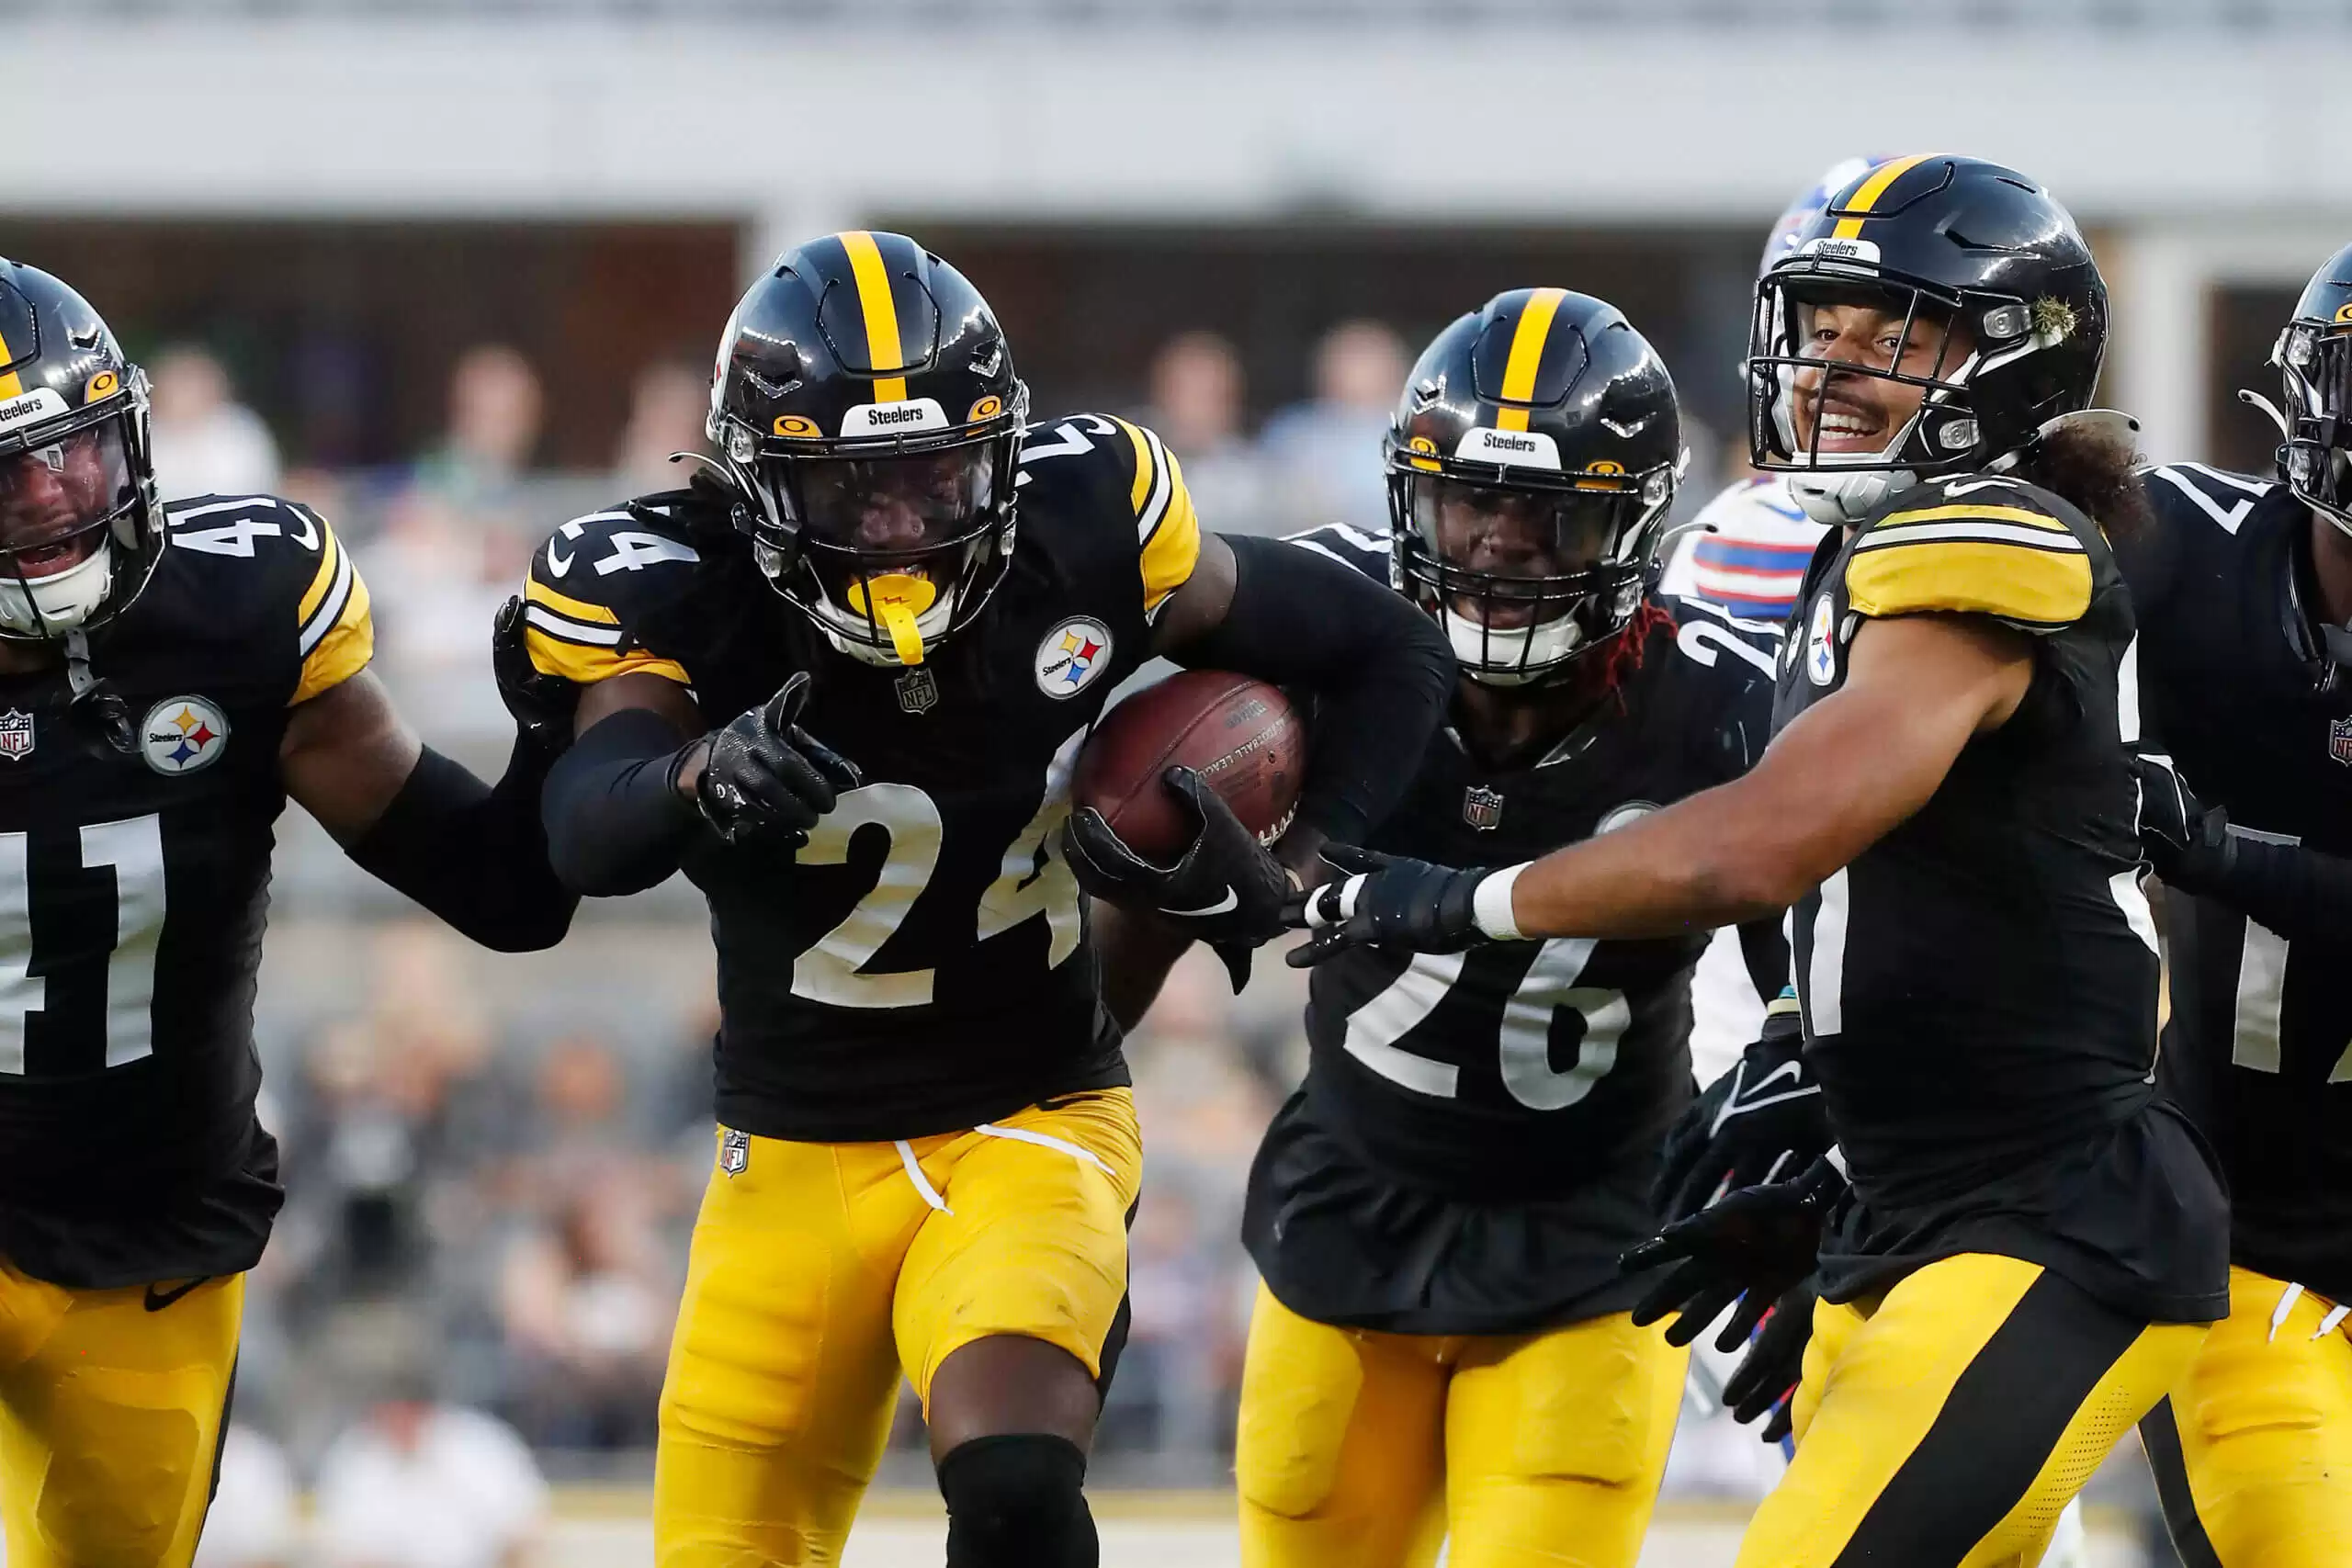 Joey Porter Jr.'s first INT and key takeaways from Steelers' dominant victory over Bills